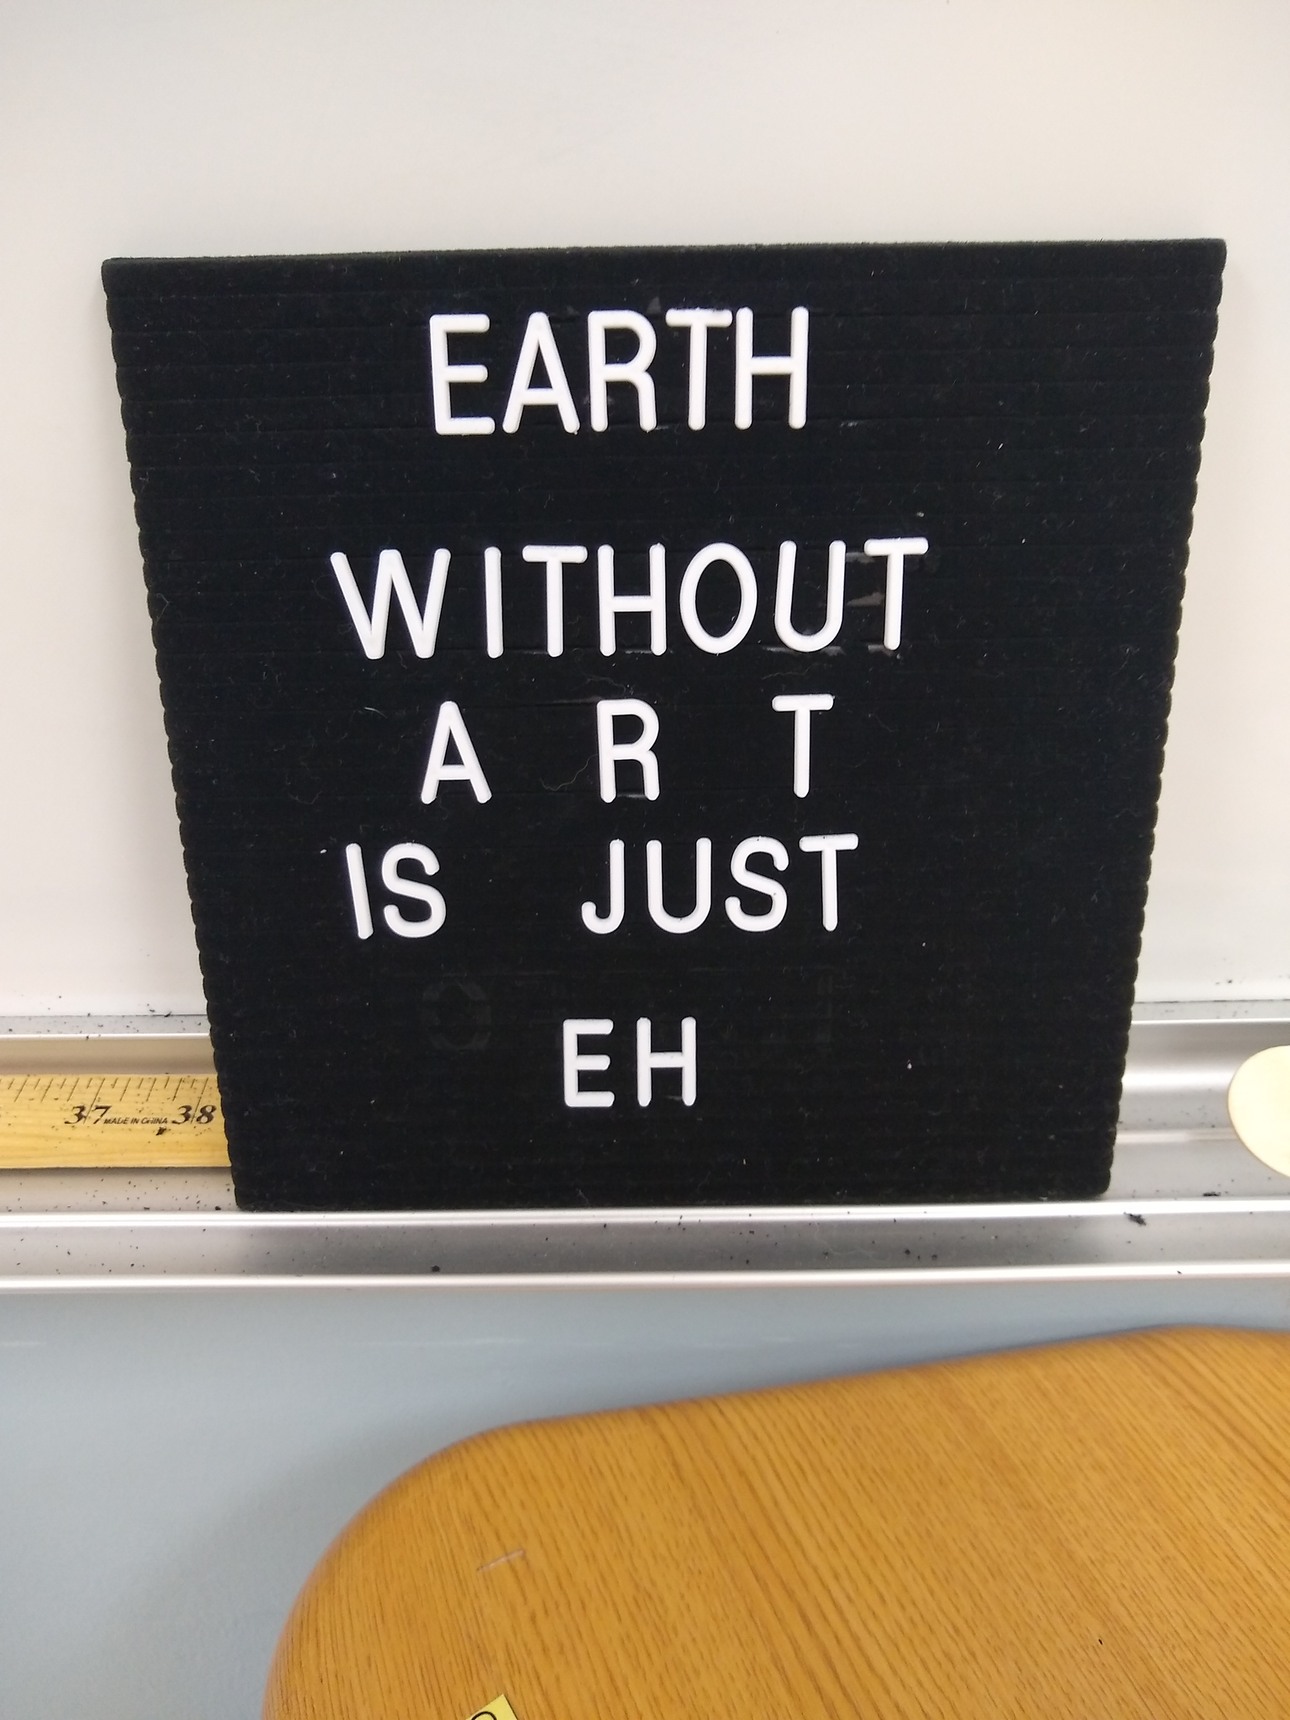 Found this in an art classroom at my mom's work... Thought it was pretty cool - meme